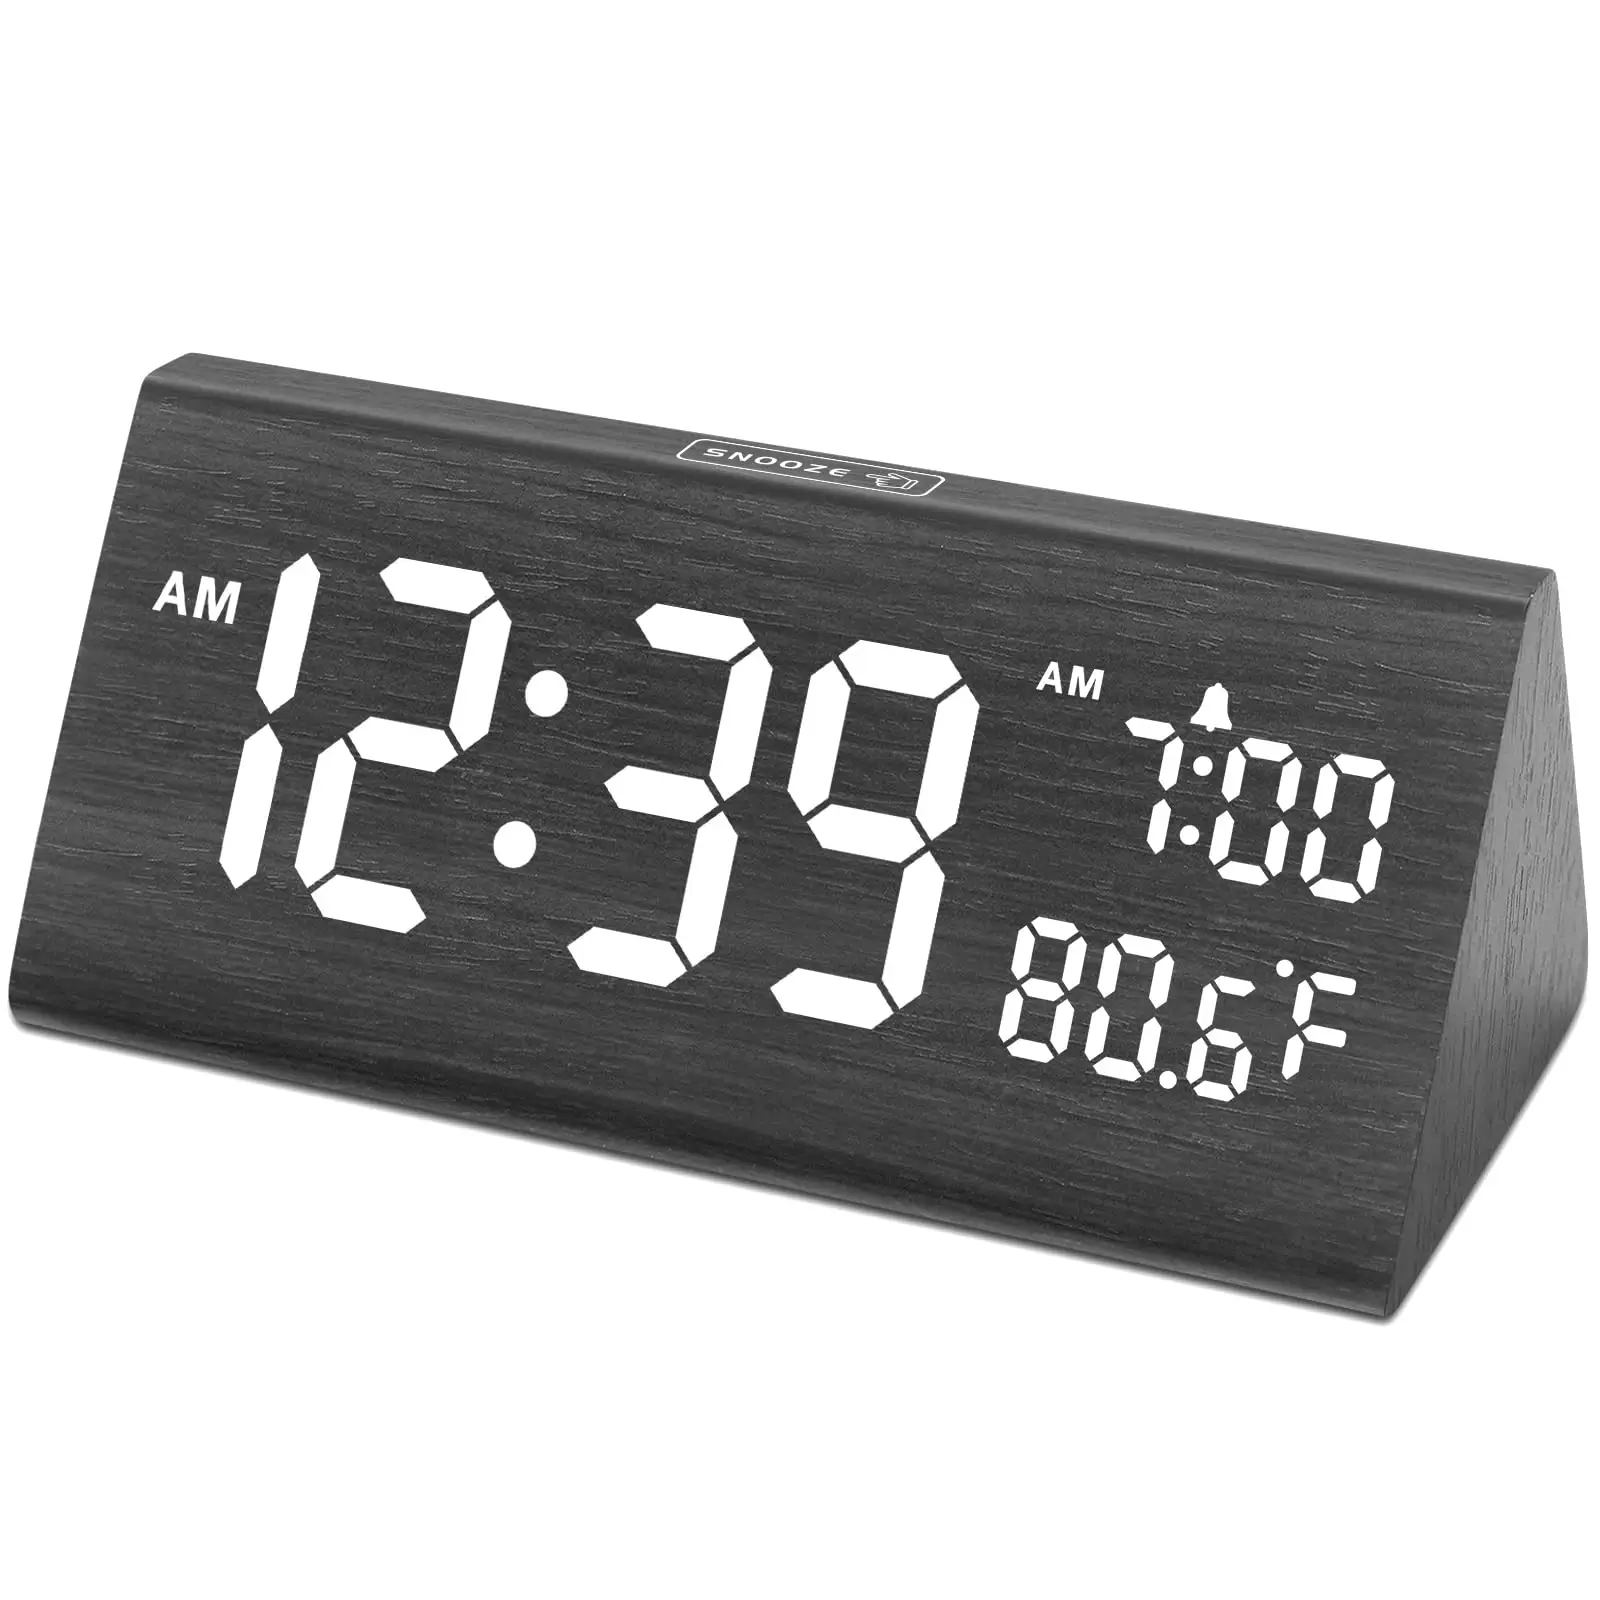 Digital Alarm Clocks for Bedrooms - Wooden Electric Clock with 2 USB Ports, Date, Weekday, Temperature, 0-100% Brightness Dimmer